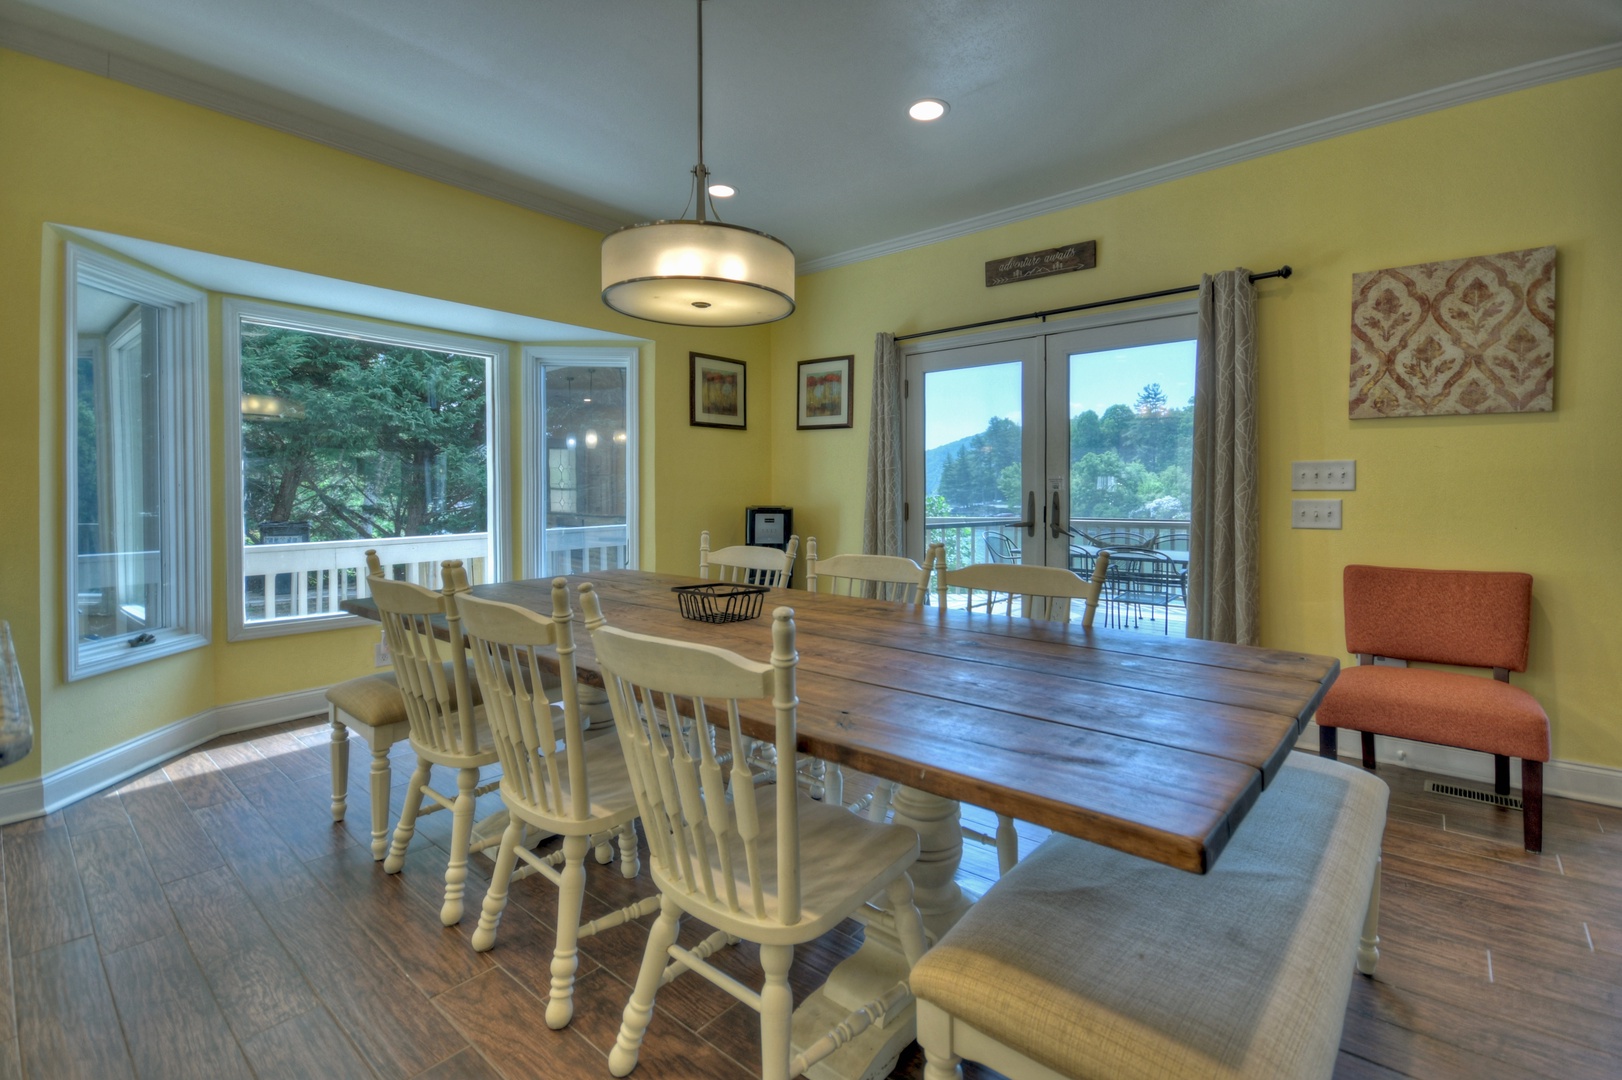 Jump Right In- Dining room area with table and chairs and deck access